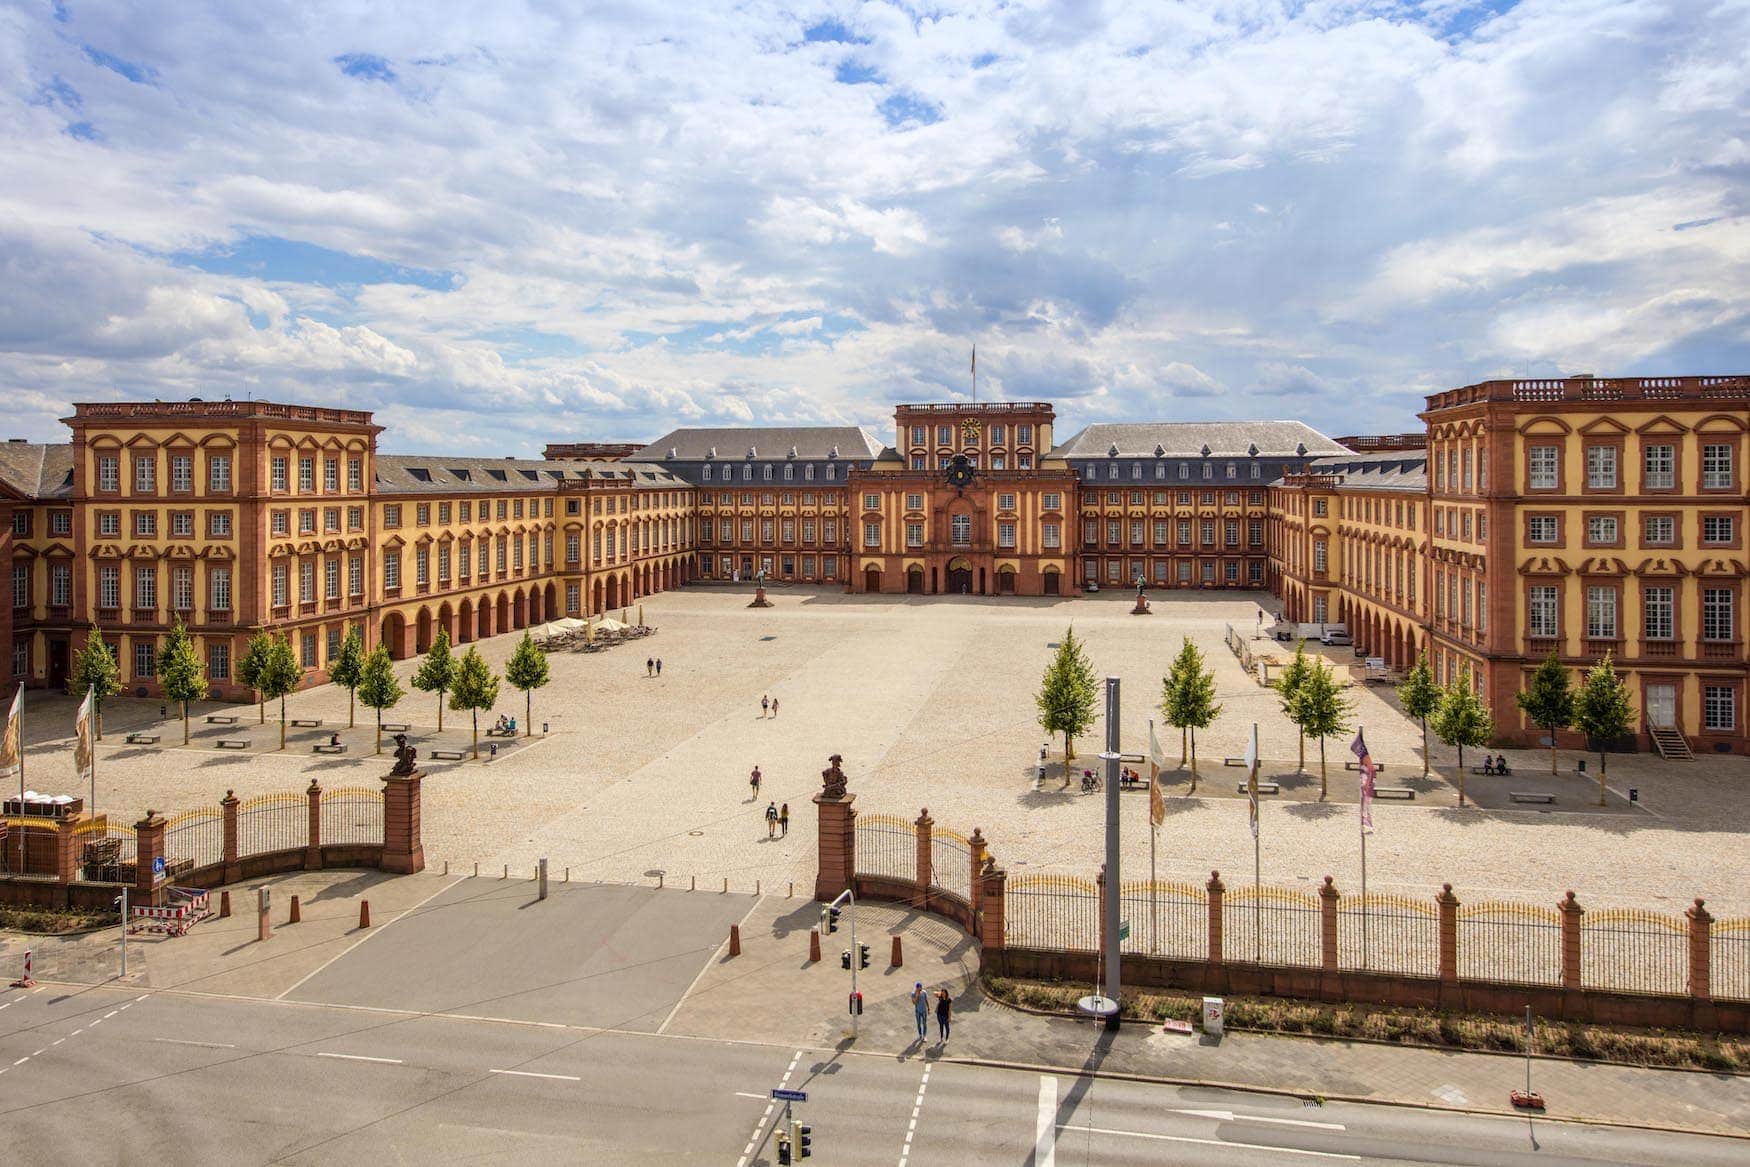 Baroque palace in Mannheim, one of the most beautiful cities in Baden-Württemberg